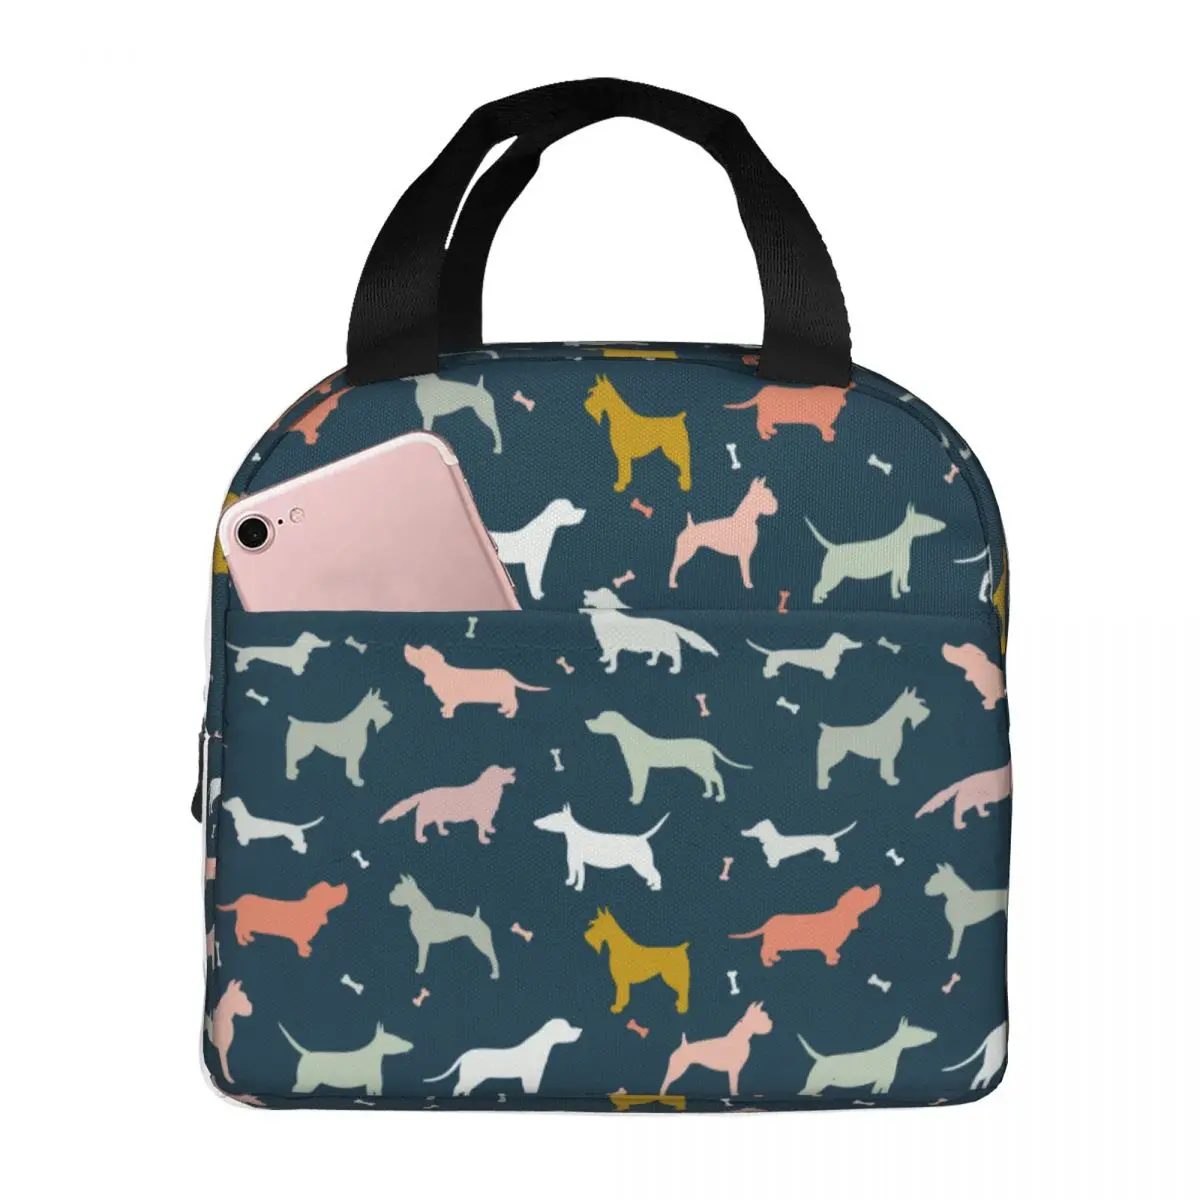 Dog Cute Animal Lunch Bags Portable Insulated Canvas Cooler Thermal Cold Food School Tote for Women Girl